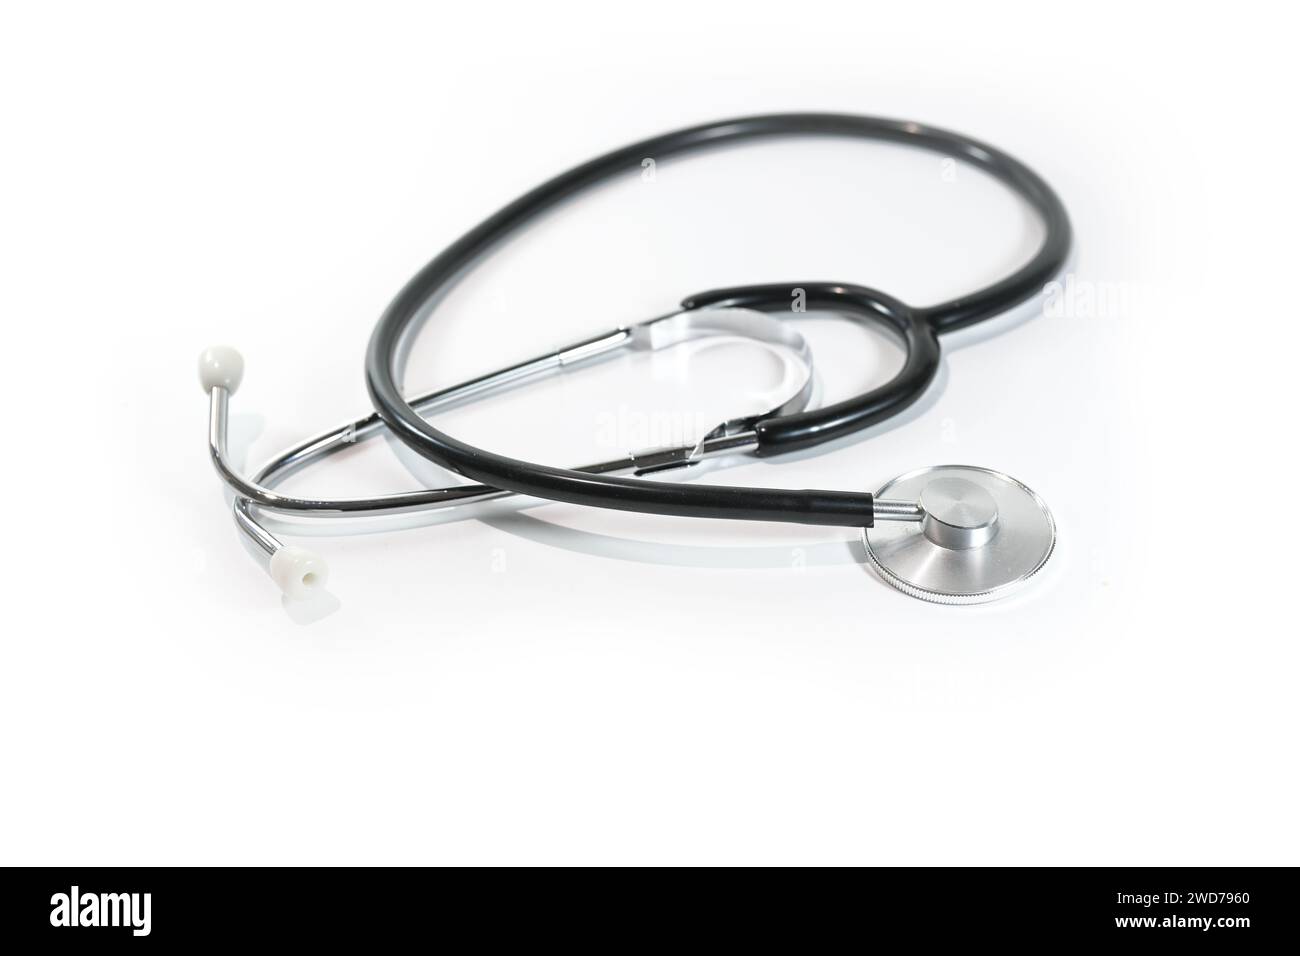 Stethoscope on a white background, medical diagnostic device for auscultation, or listening to internal body sounds, health care concept, copy space, Stock Photo